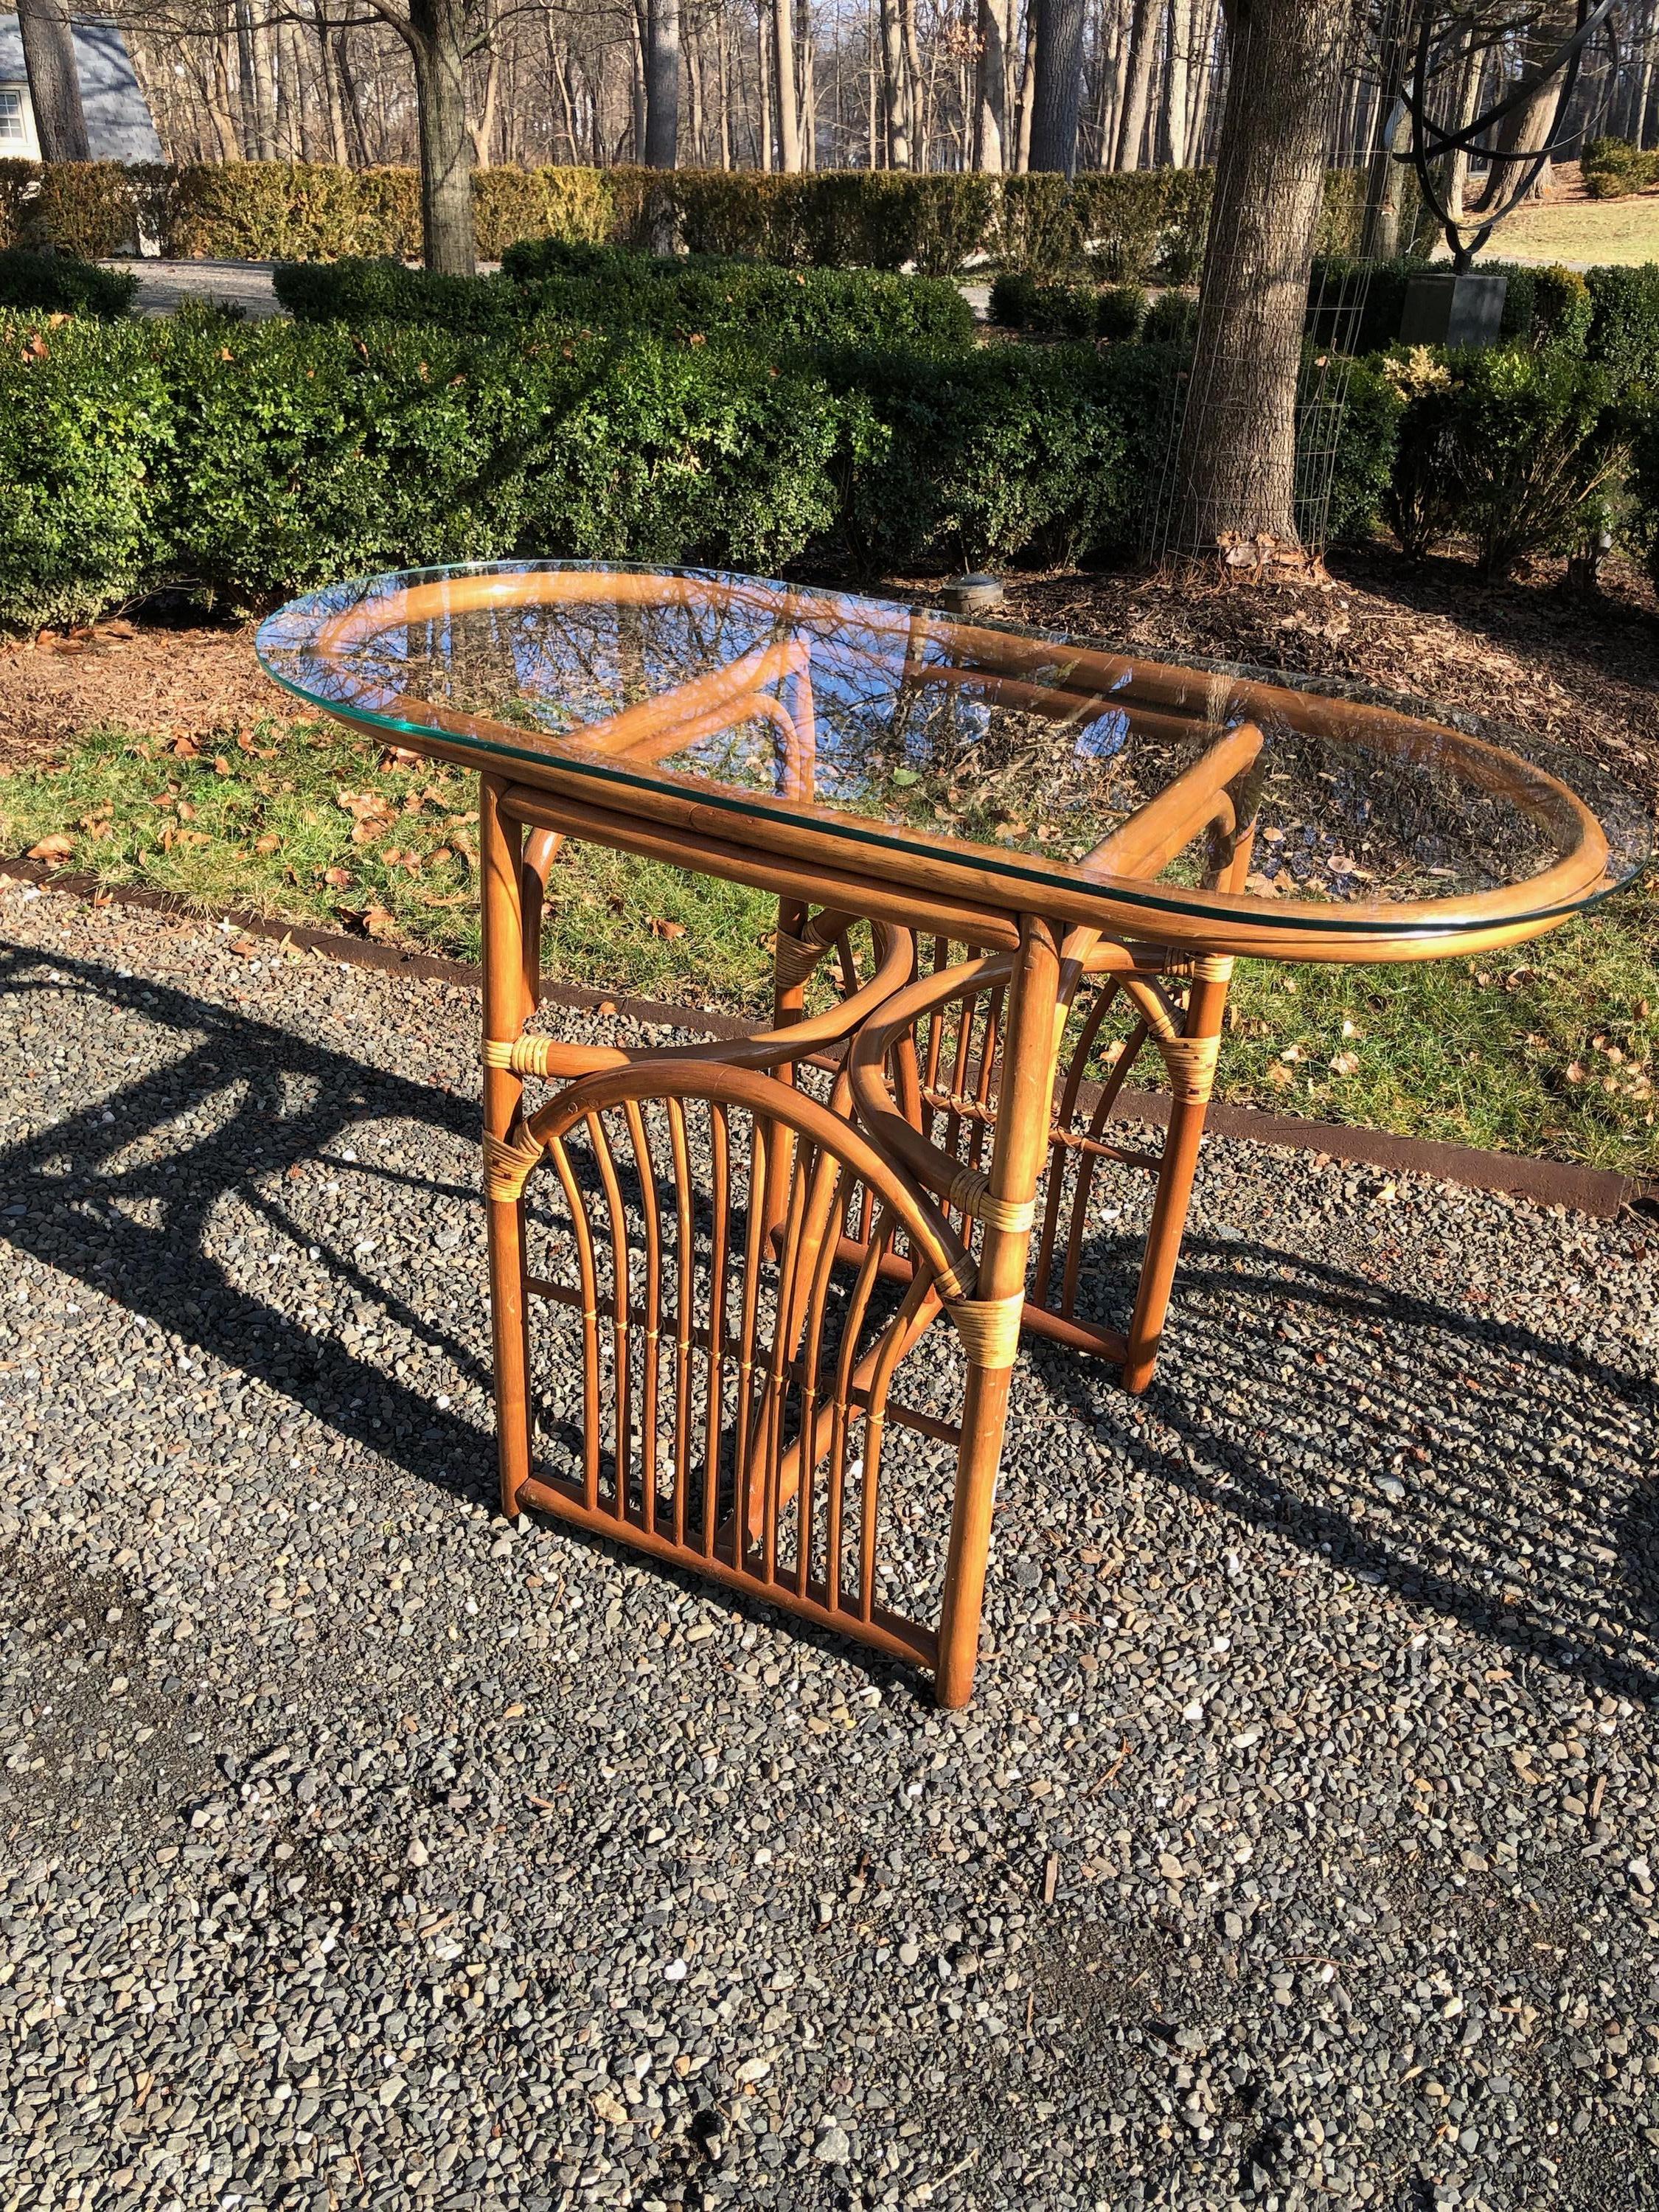 North American Cool Mid-Century Modern Bentwood and Rattan Dining Set